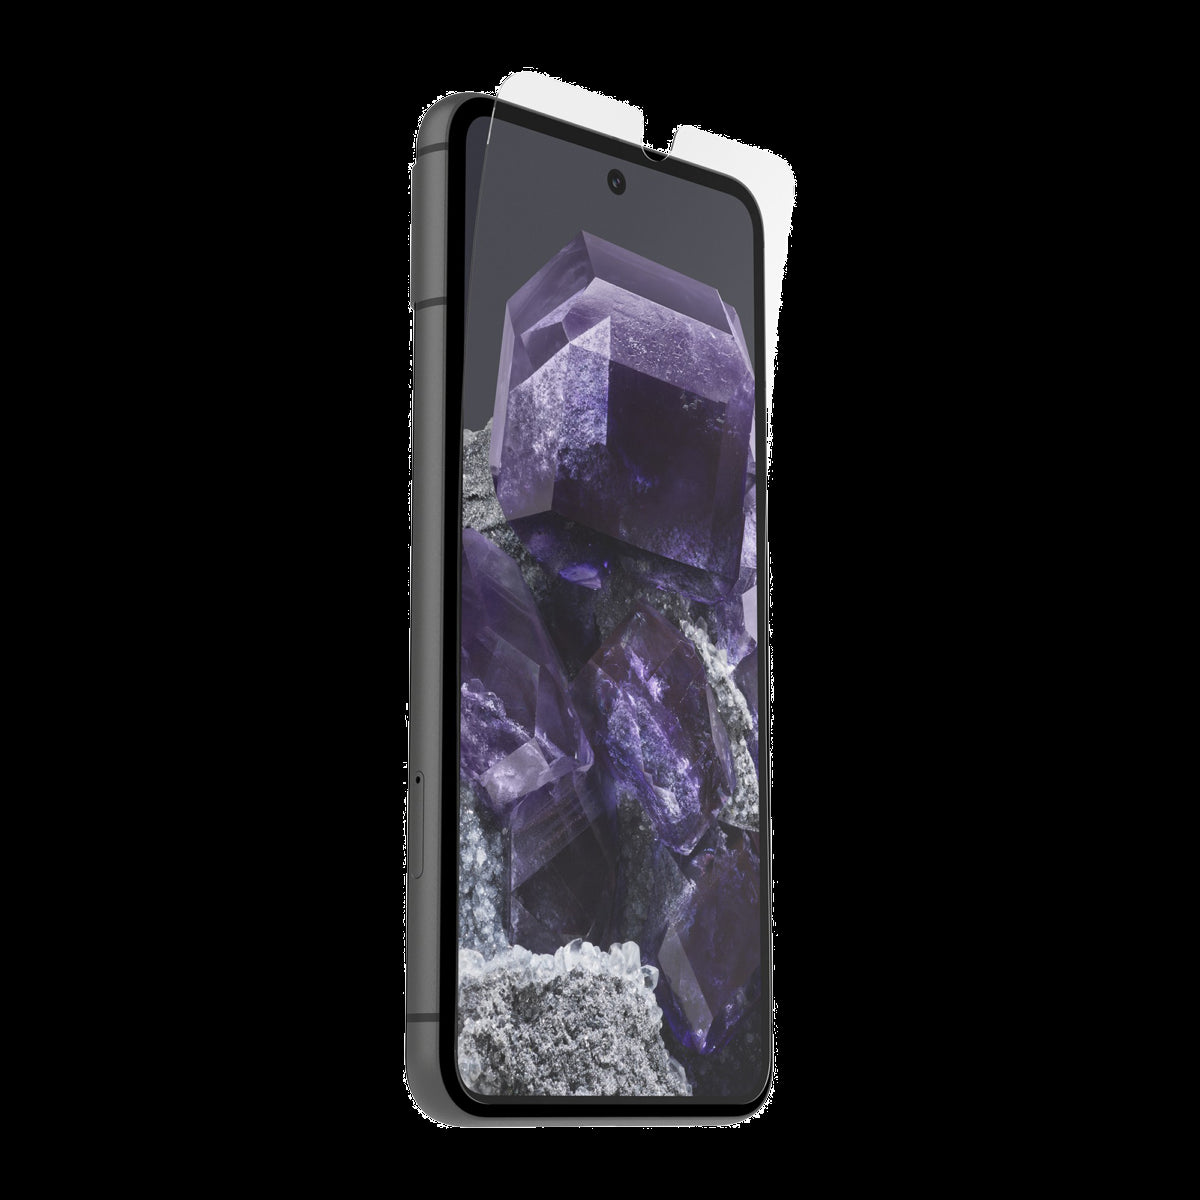 The OtterBox Glass Screen Protector delivers reliable protection against drops, breaks and scratches while also resisting smudges and fingerprints.